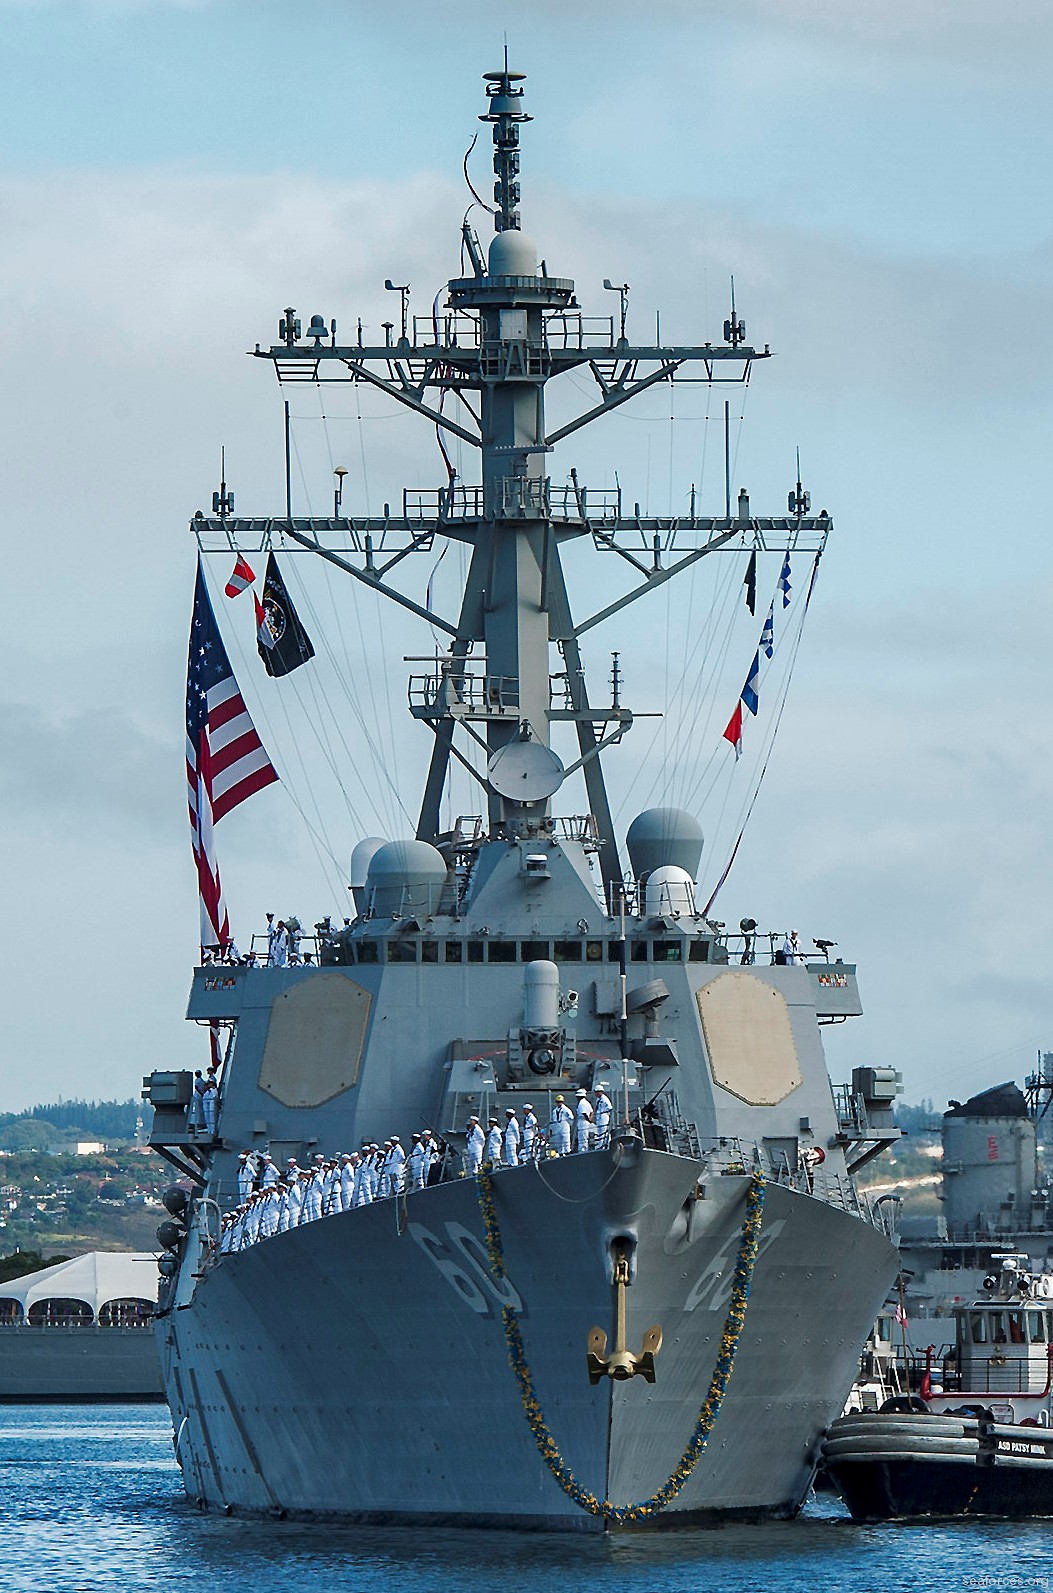 ddg-60 uss paul hamilton guided missile destroyer us navy 05 pearl harbor hawaii